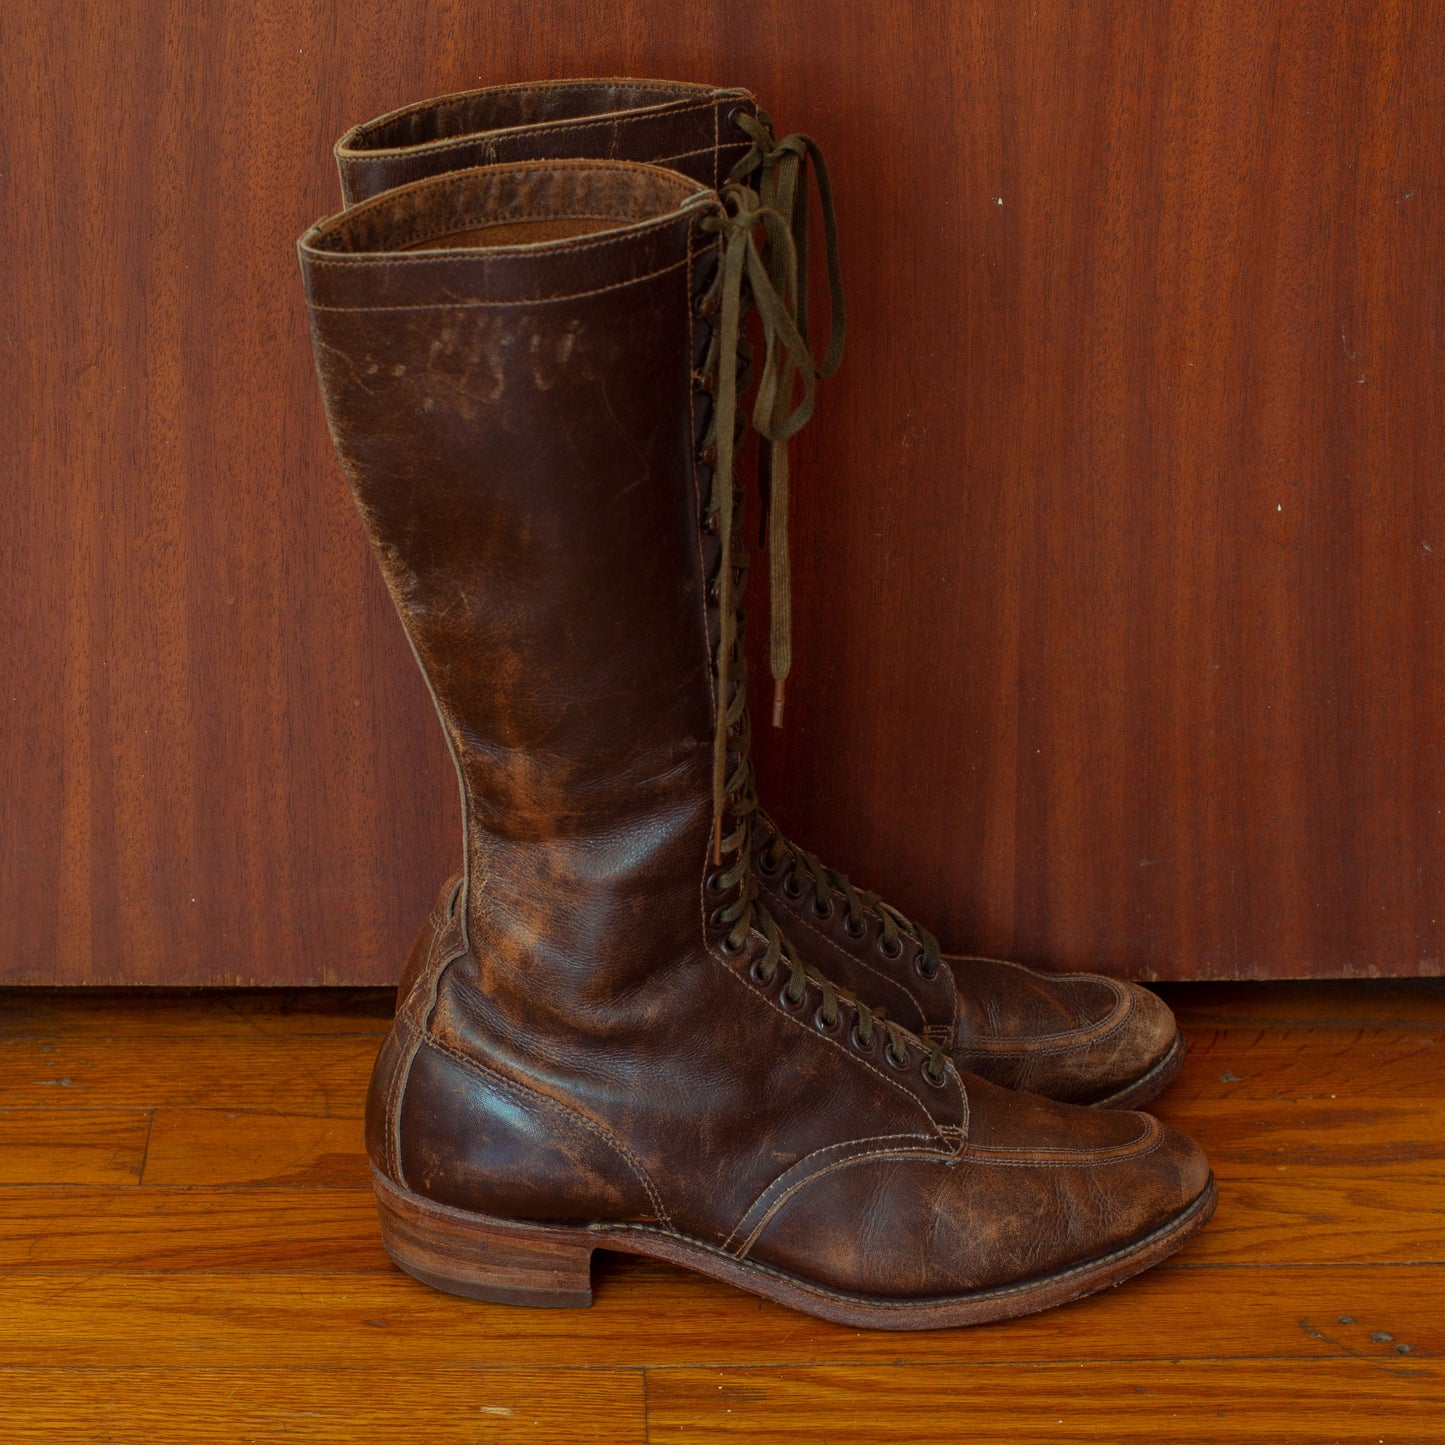 Vintage 1930s Lace-up Knee High Leather Boots